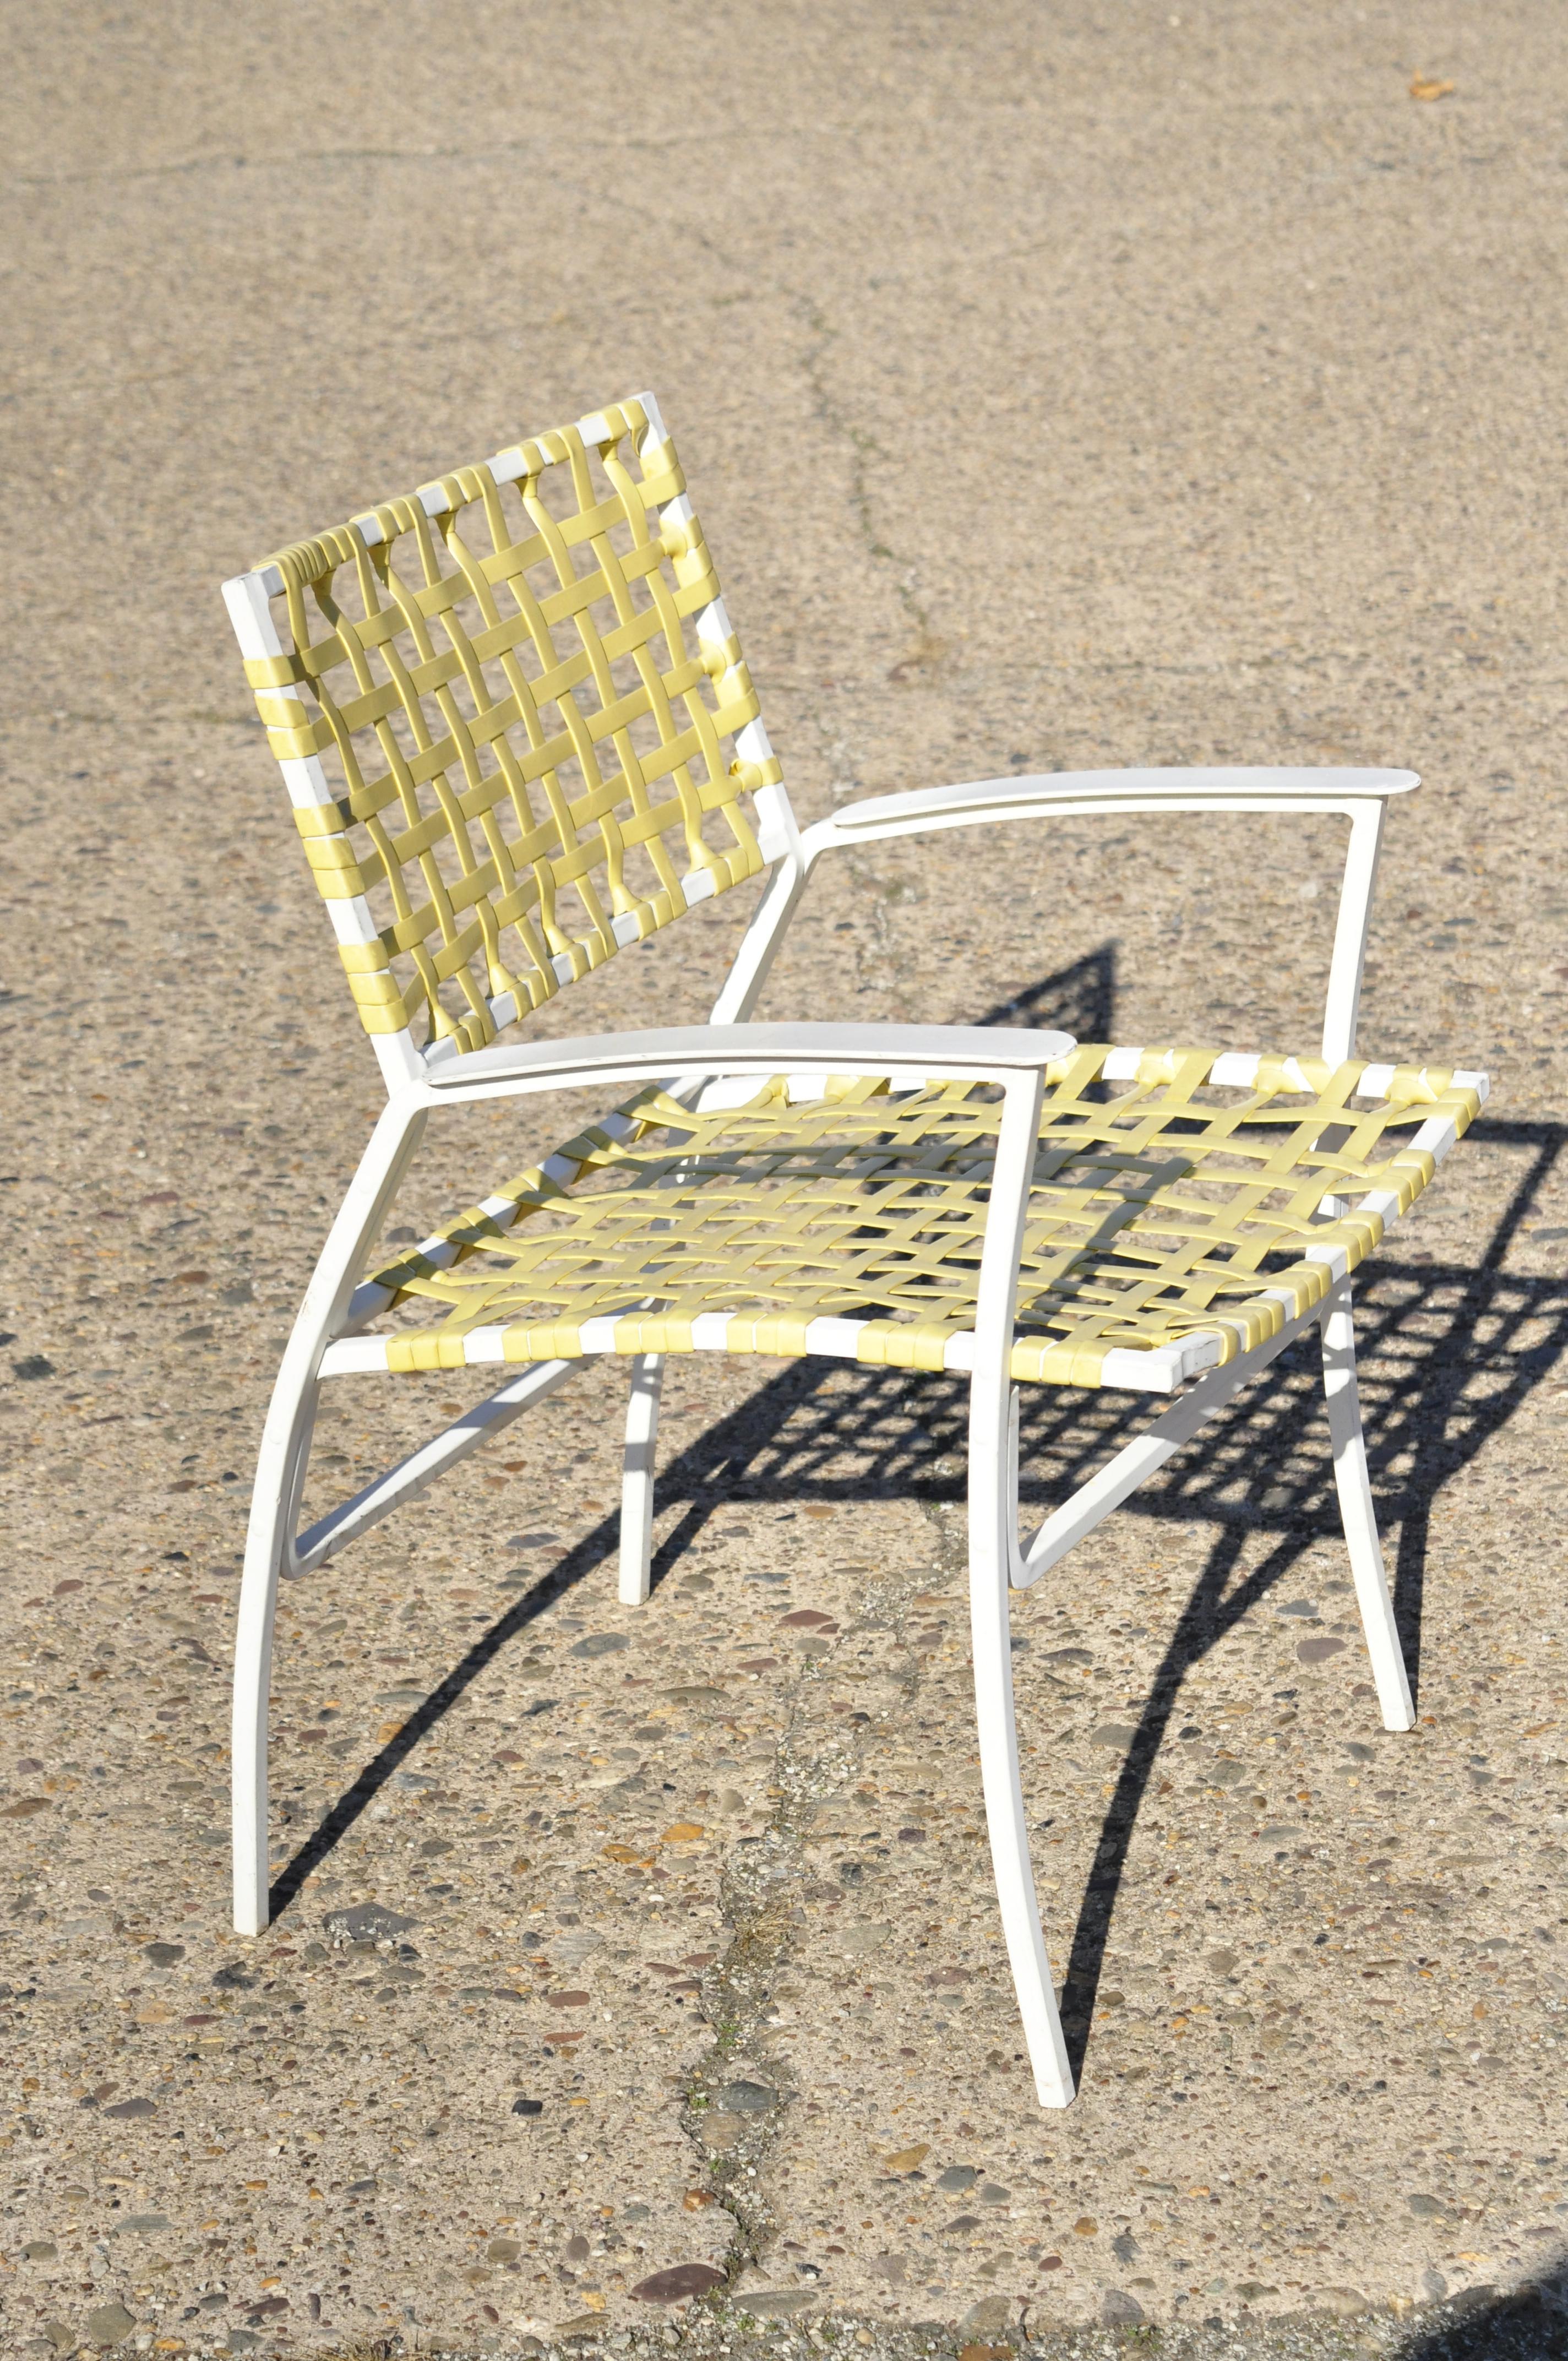 Medallion aluminum yellow woven vinyl strap patio POOL lounge chair, 1 chair. Listing is for 1 chair. Currently 3 available. Item includes yellow woven vinyl strap seat and back, white cast aluminum frames, clean modernist lines, sleek sculptural